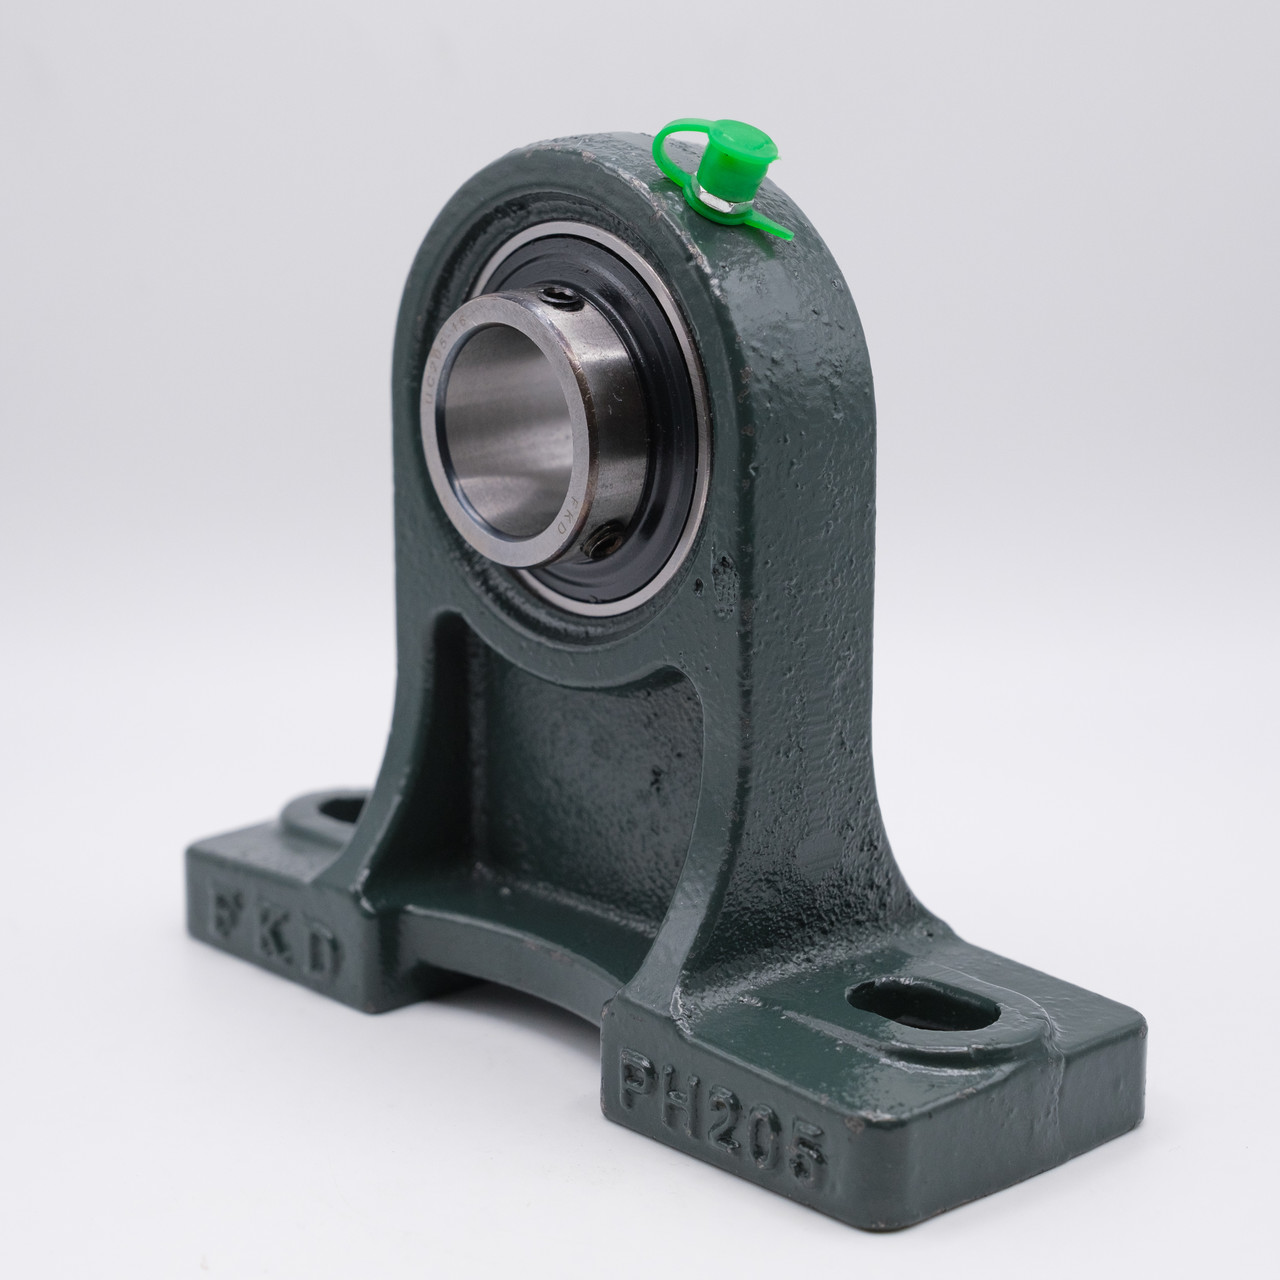 UCPH206 GENERIC 30mm Normal duty 2 Bolt Cast Iron Pillow Block Housed Unit Bearing with extended base to centre height - Metric Thumbnail